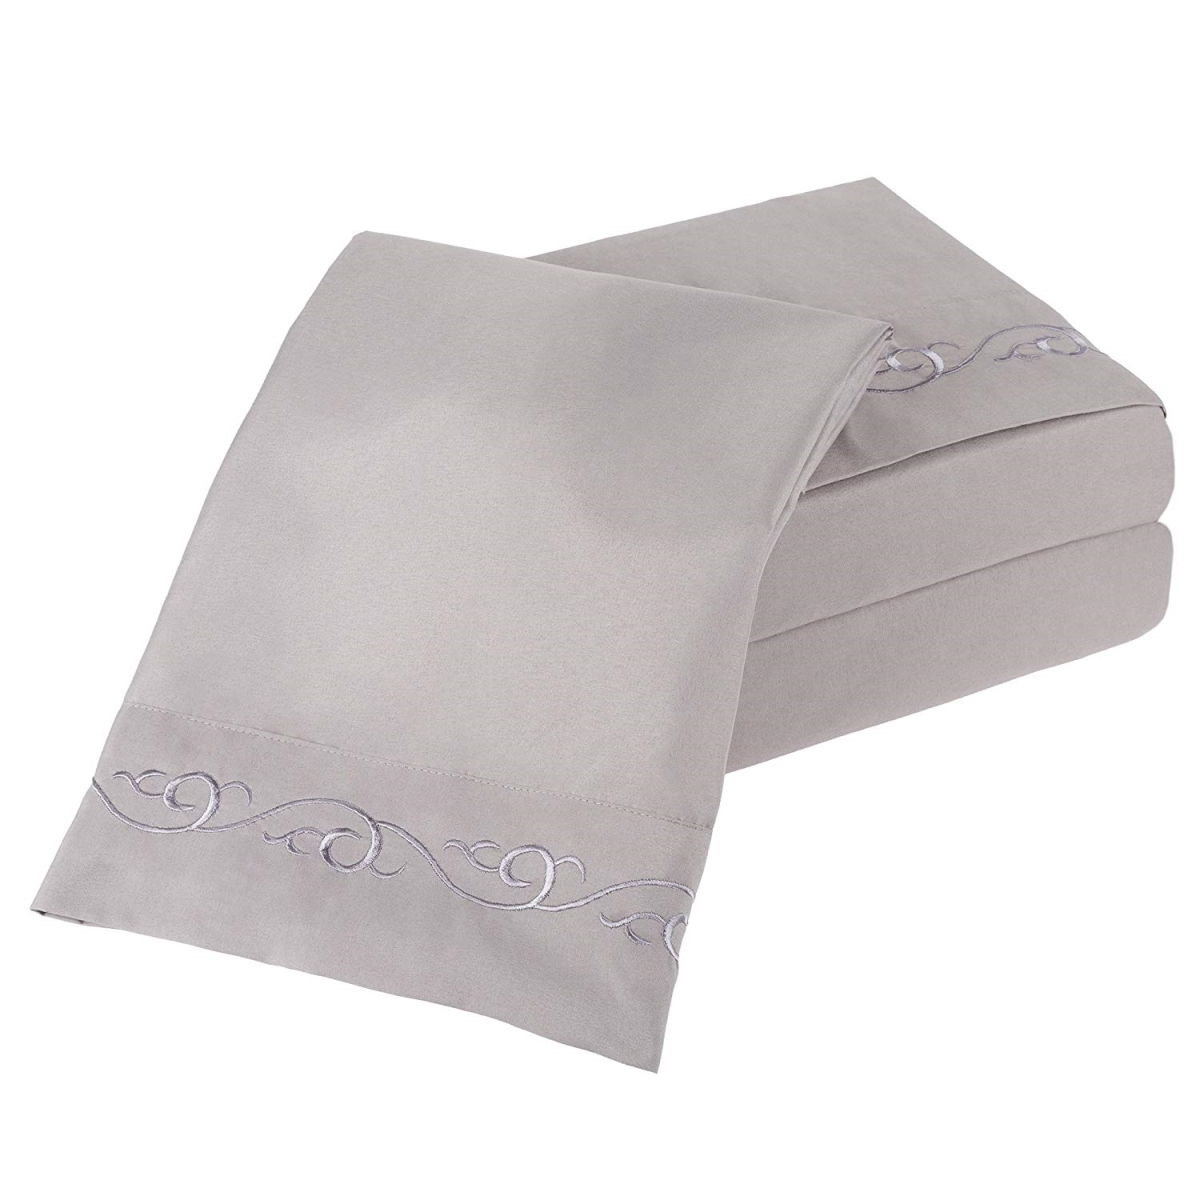 61a-17637 Embroidered Brushed Microfiber Sheets Set, King Size - Silver - 4 Piece